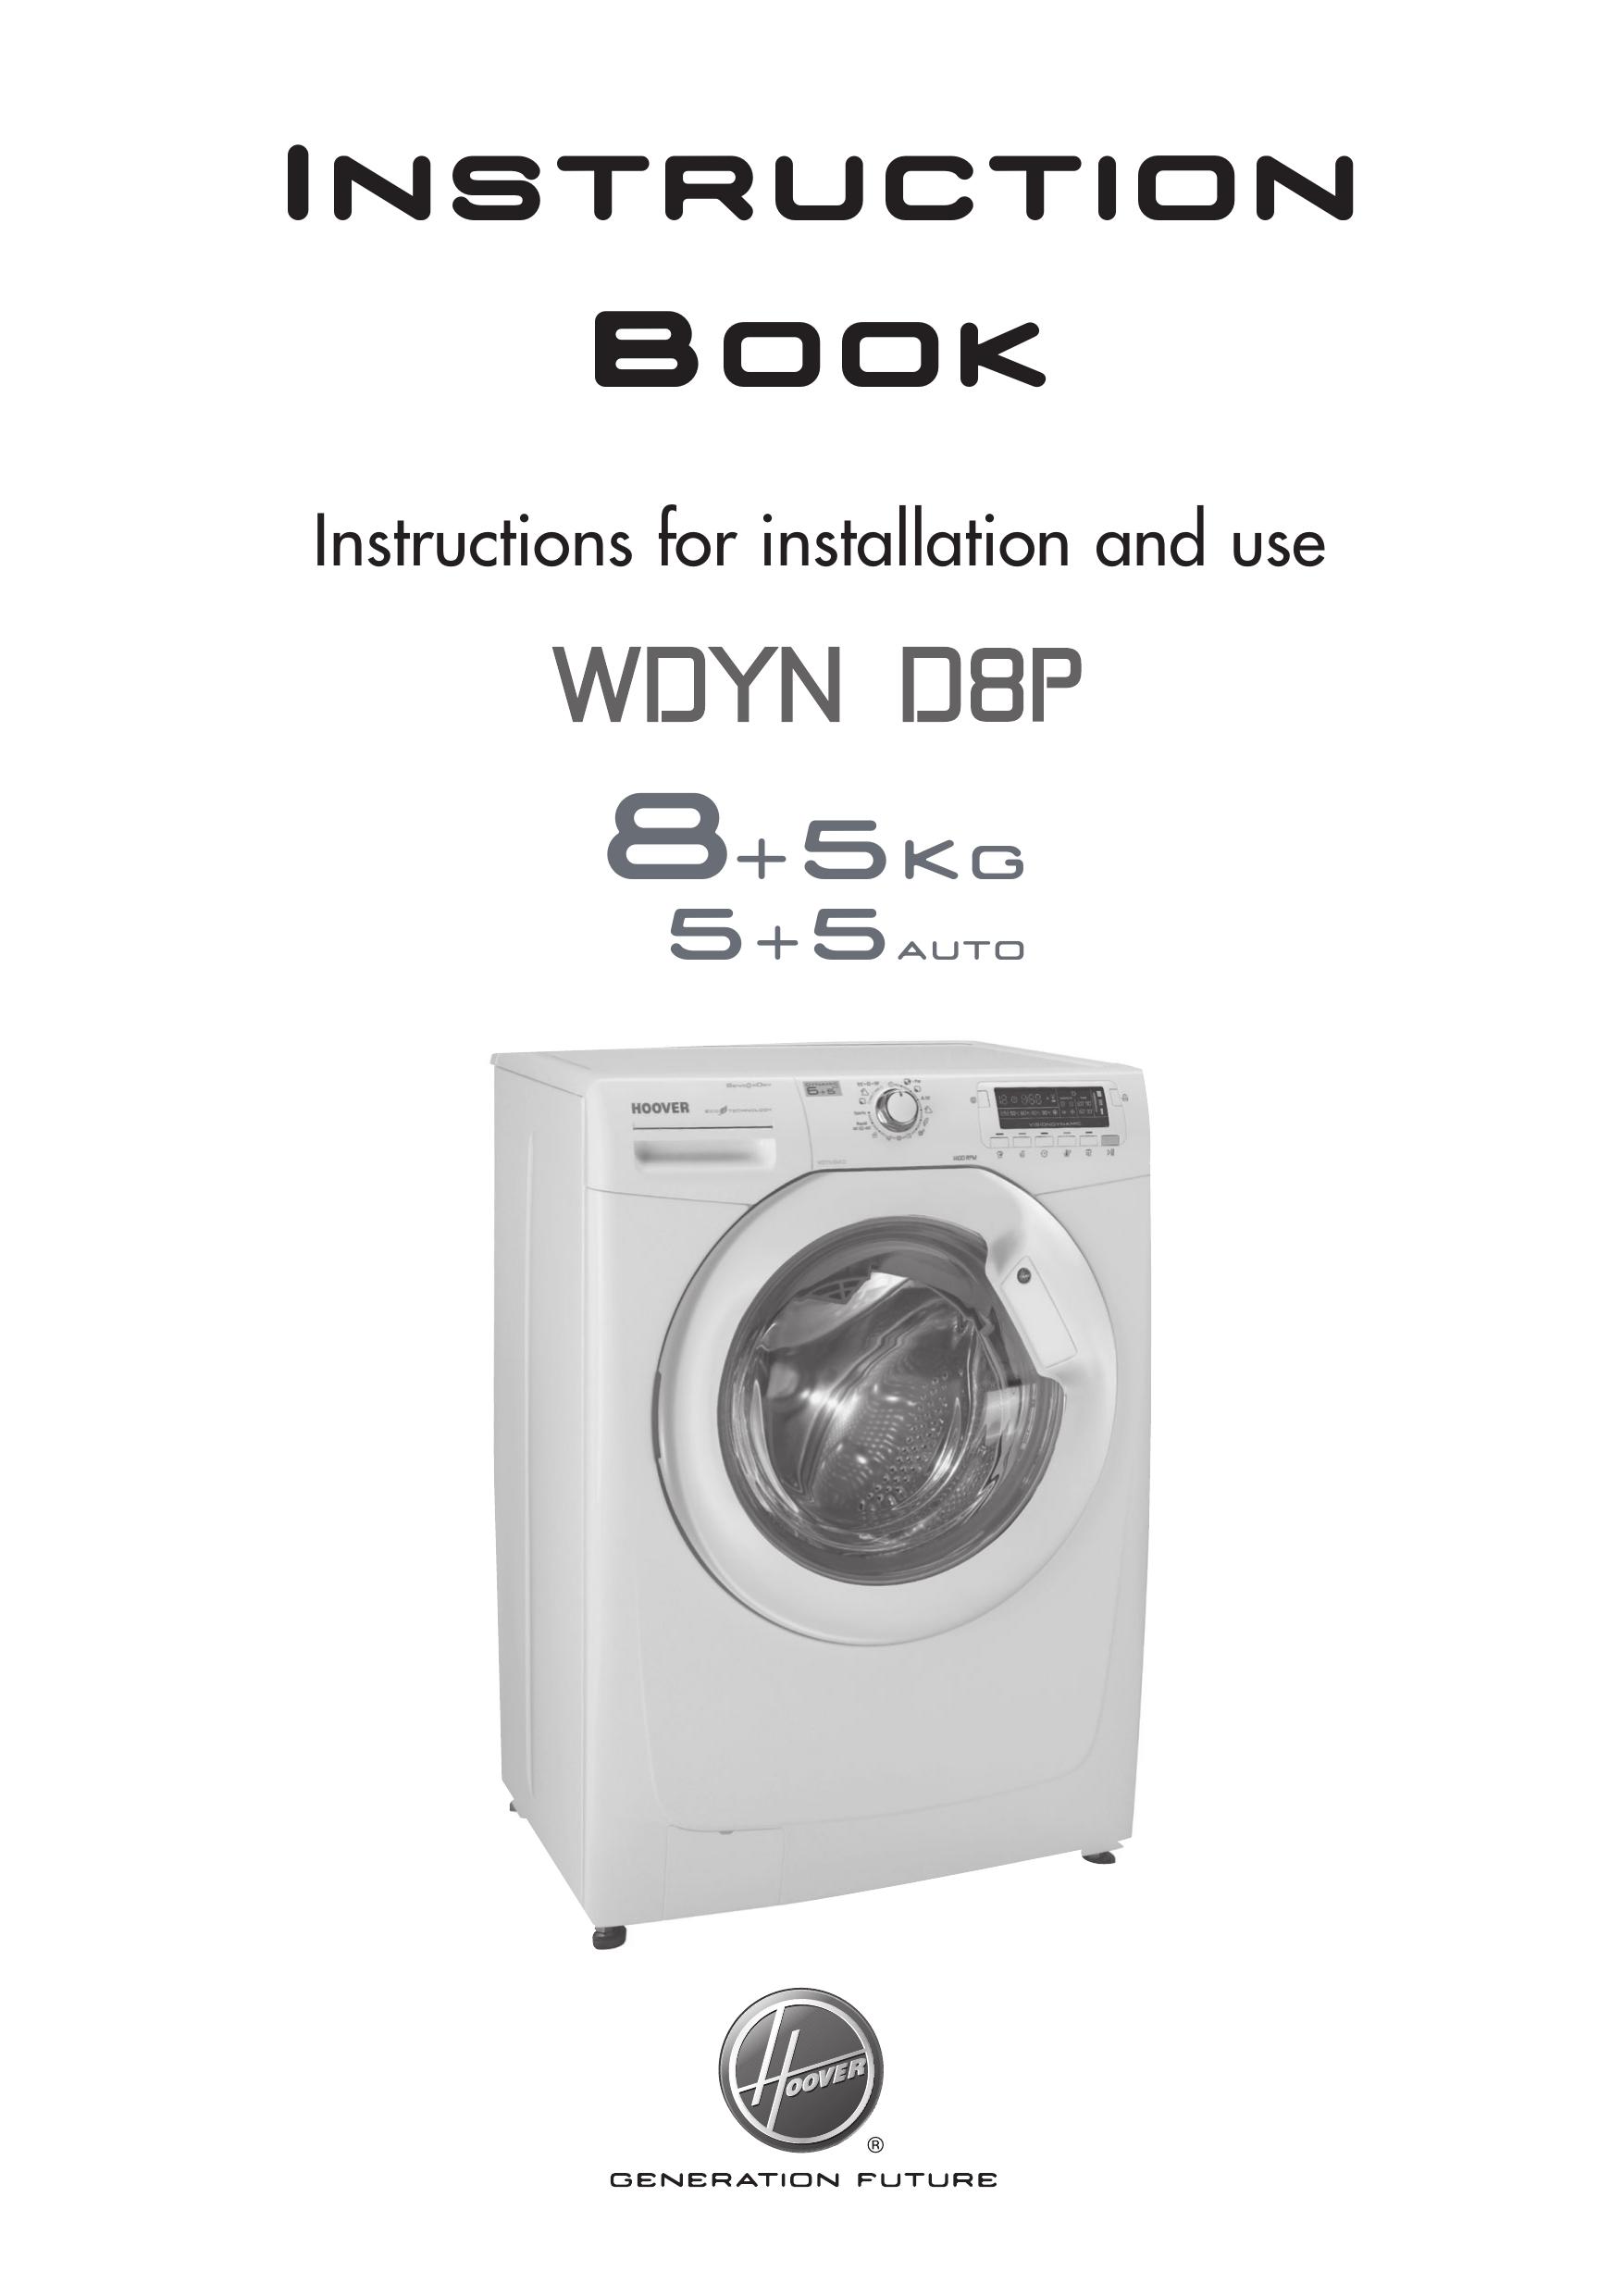 Hoover WDYN D8P Washer User Manual